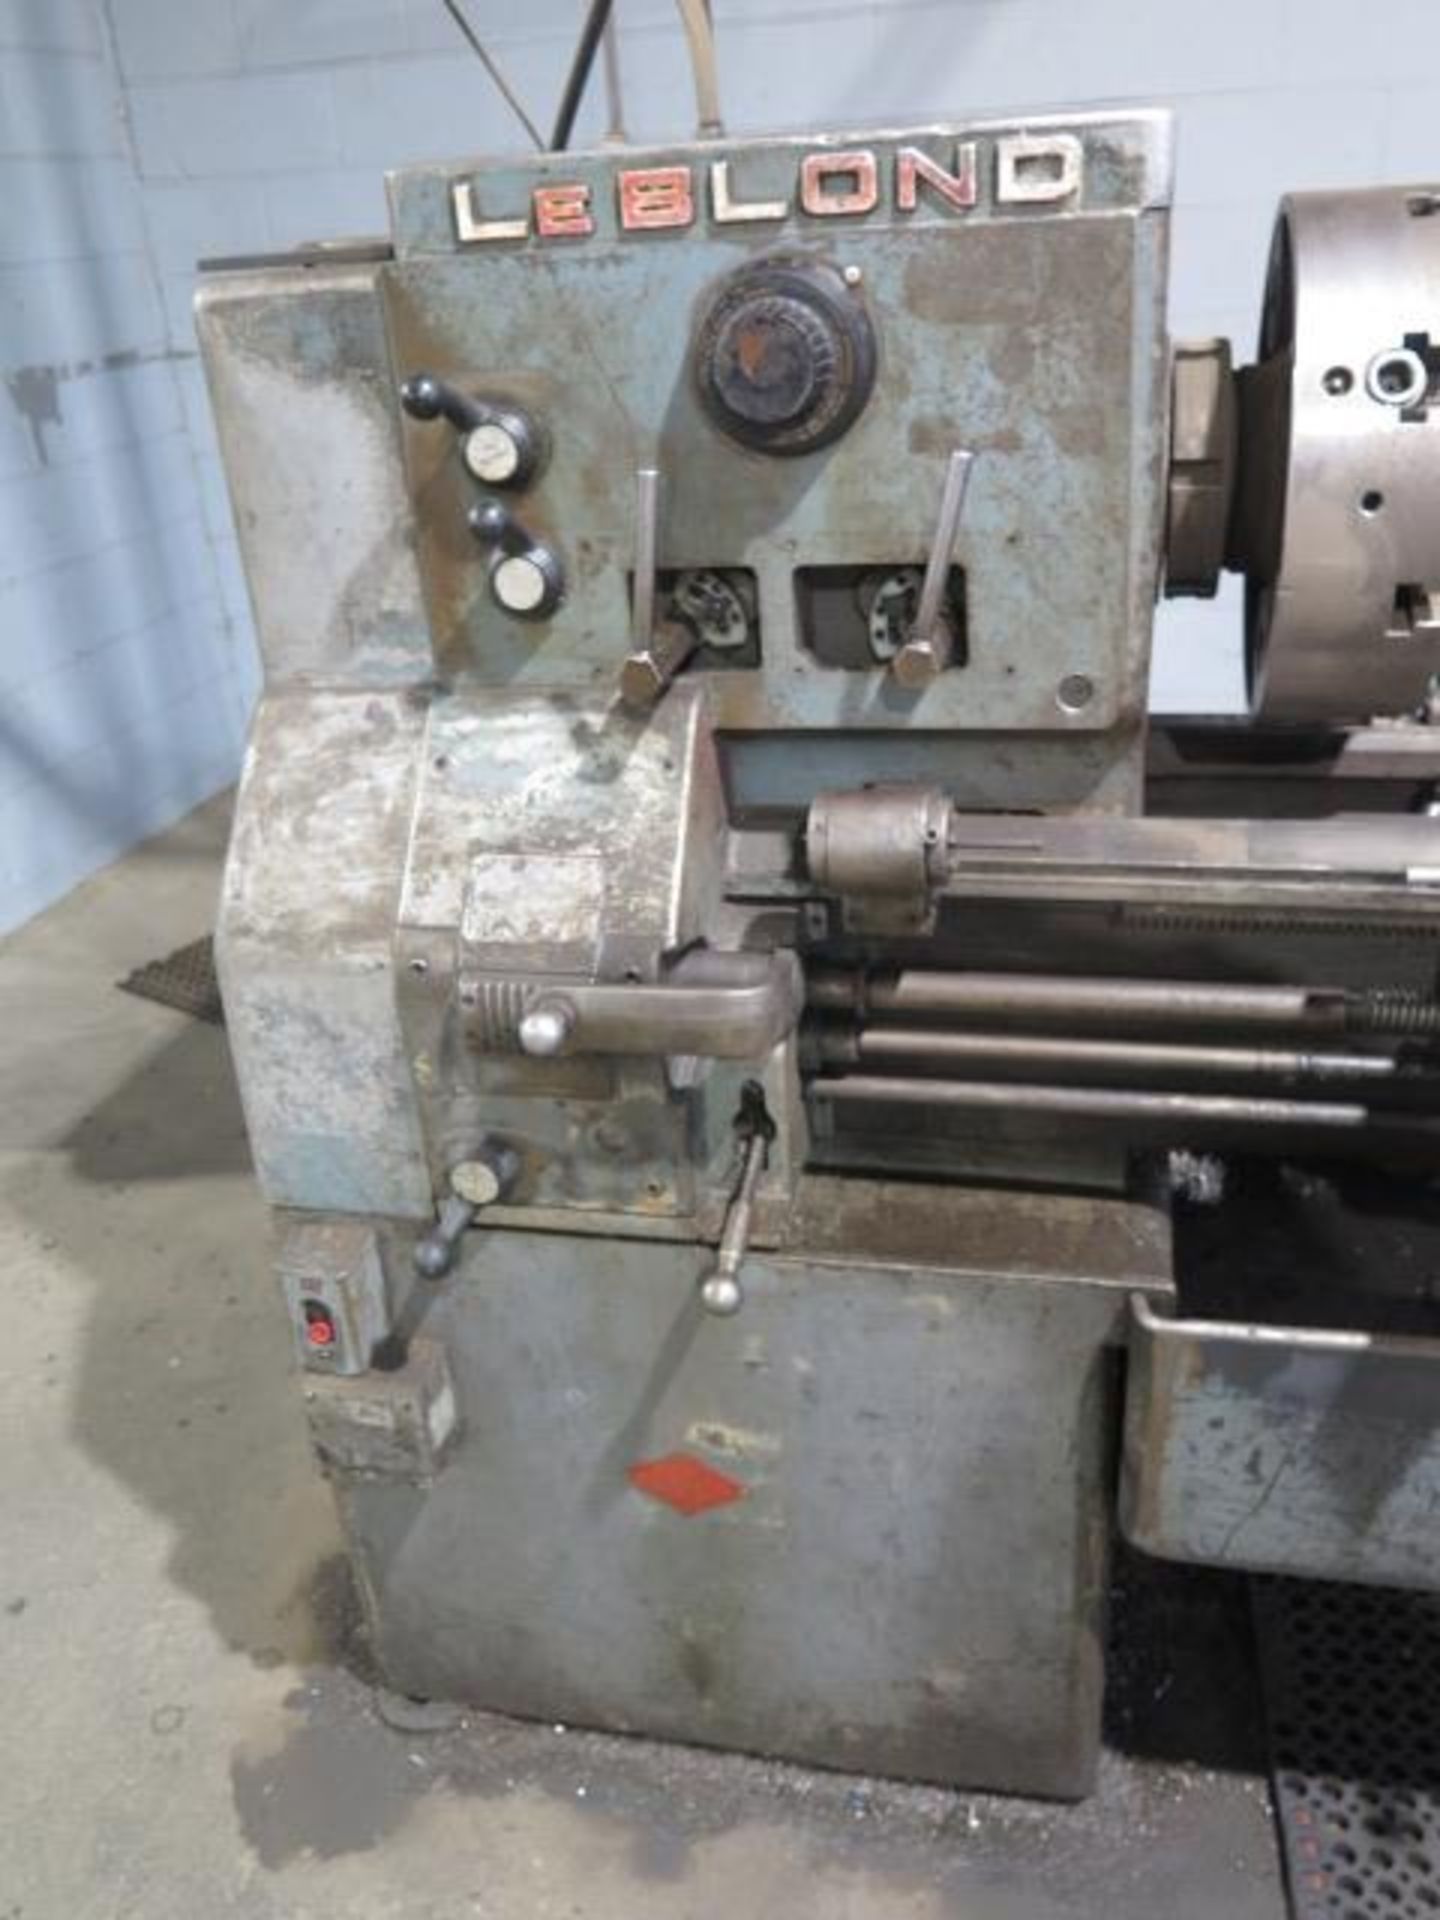 LeBlond 19” x 106” Lathe w/ 25-1000 Dial Change RPM, Inch Threading, Tailstock, (2) Steady Rests, - Image 4 of 11